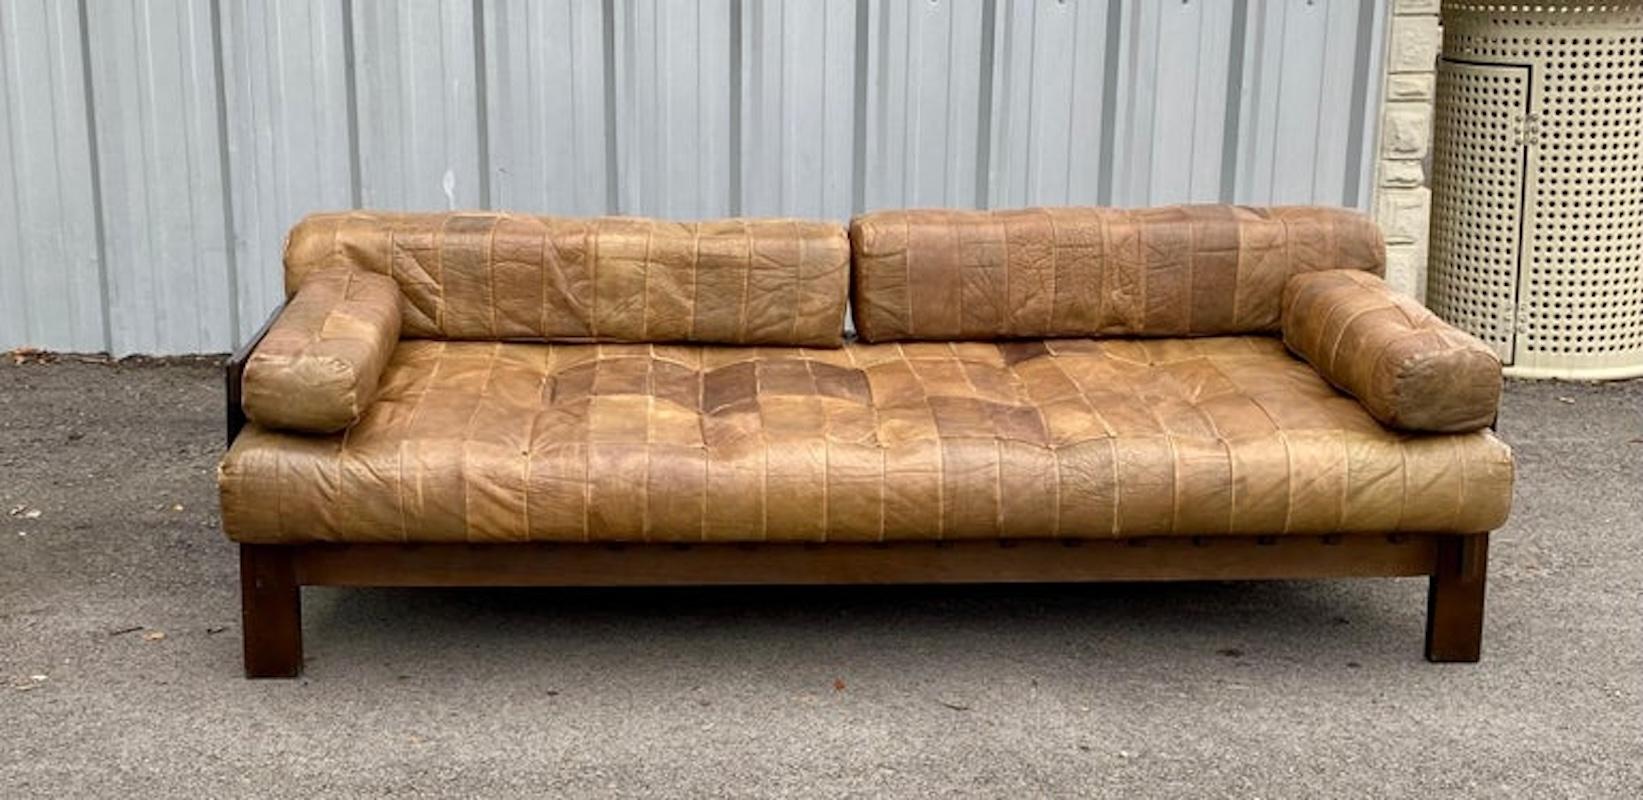 Vintage leather patchwork daybed sofa features quality leather in varying hues of warm browns with removable seat, arm, and back cushions. This daybed sofa has a deep seat, nice patina, and high-quality stitching and sits on a stained beech wooden